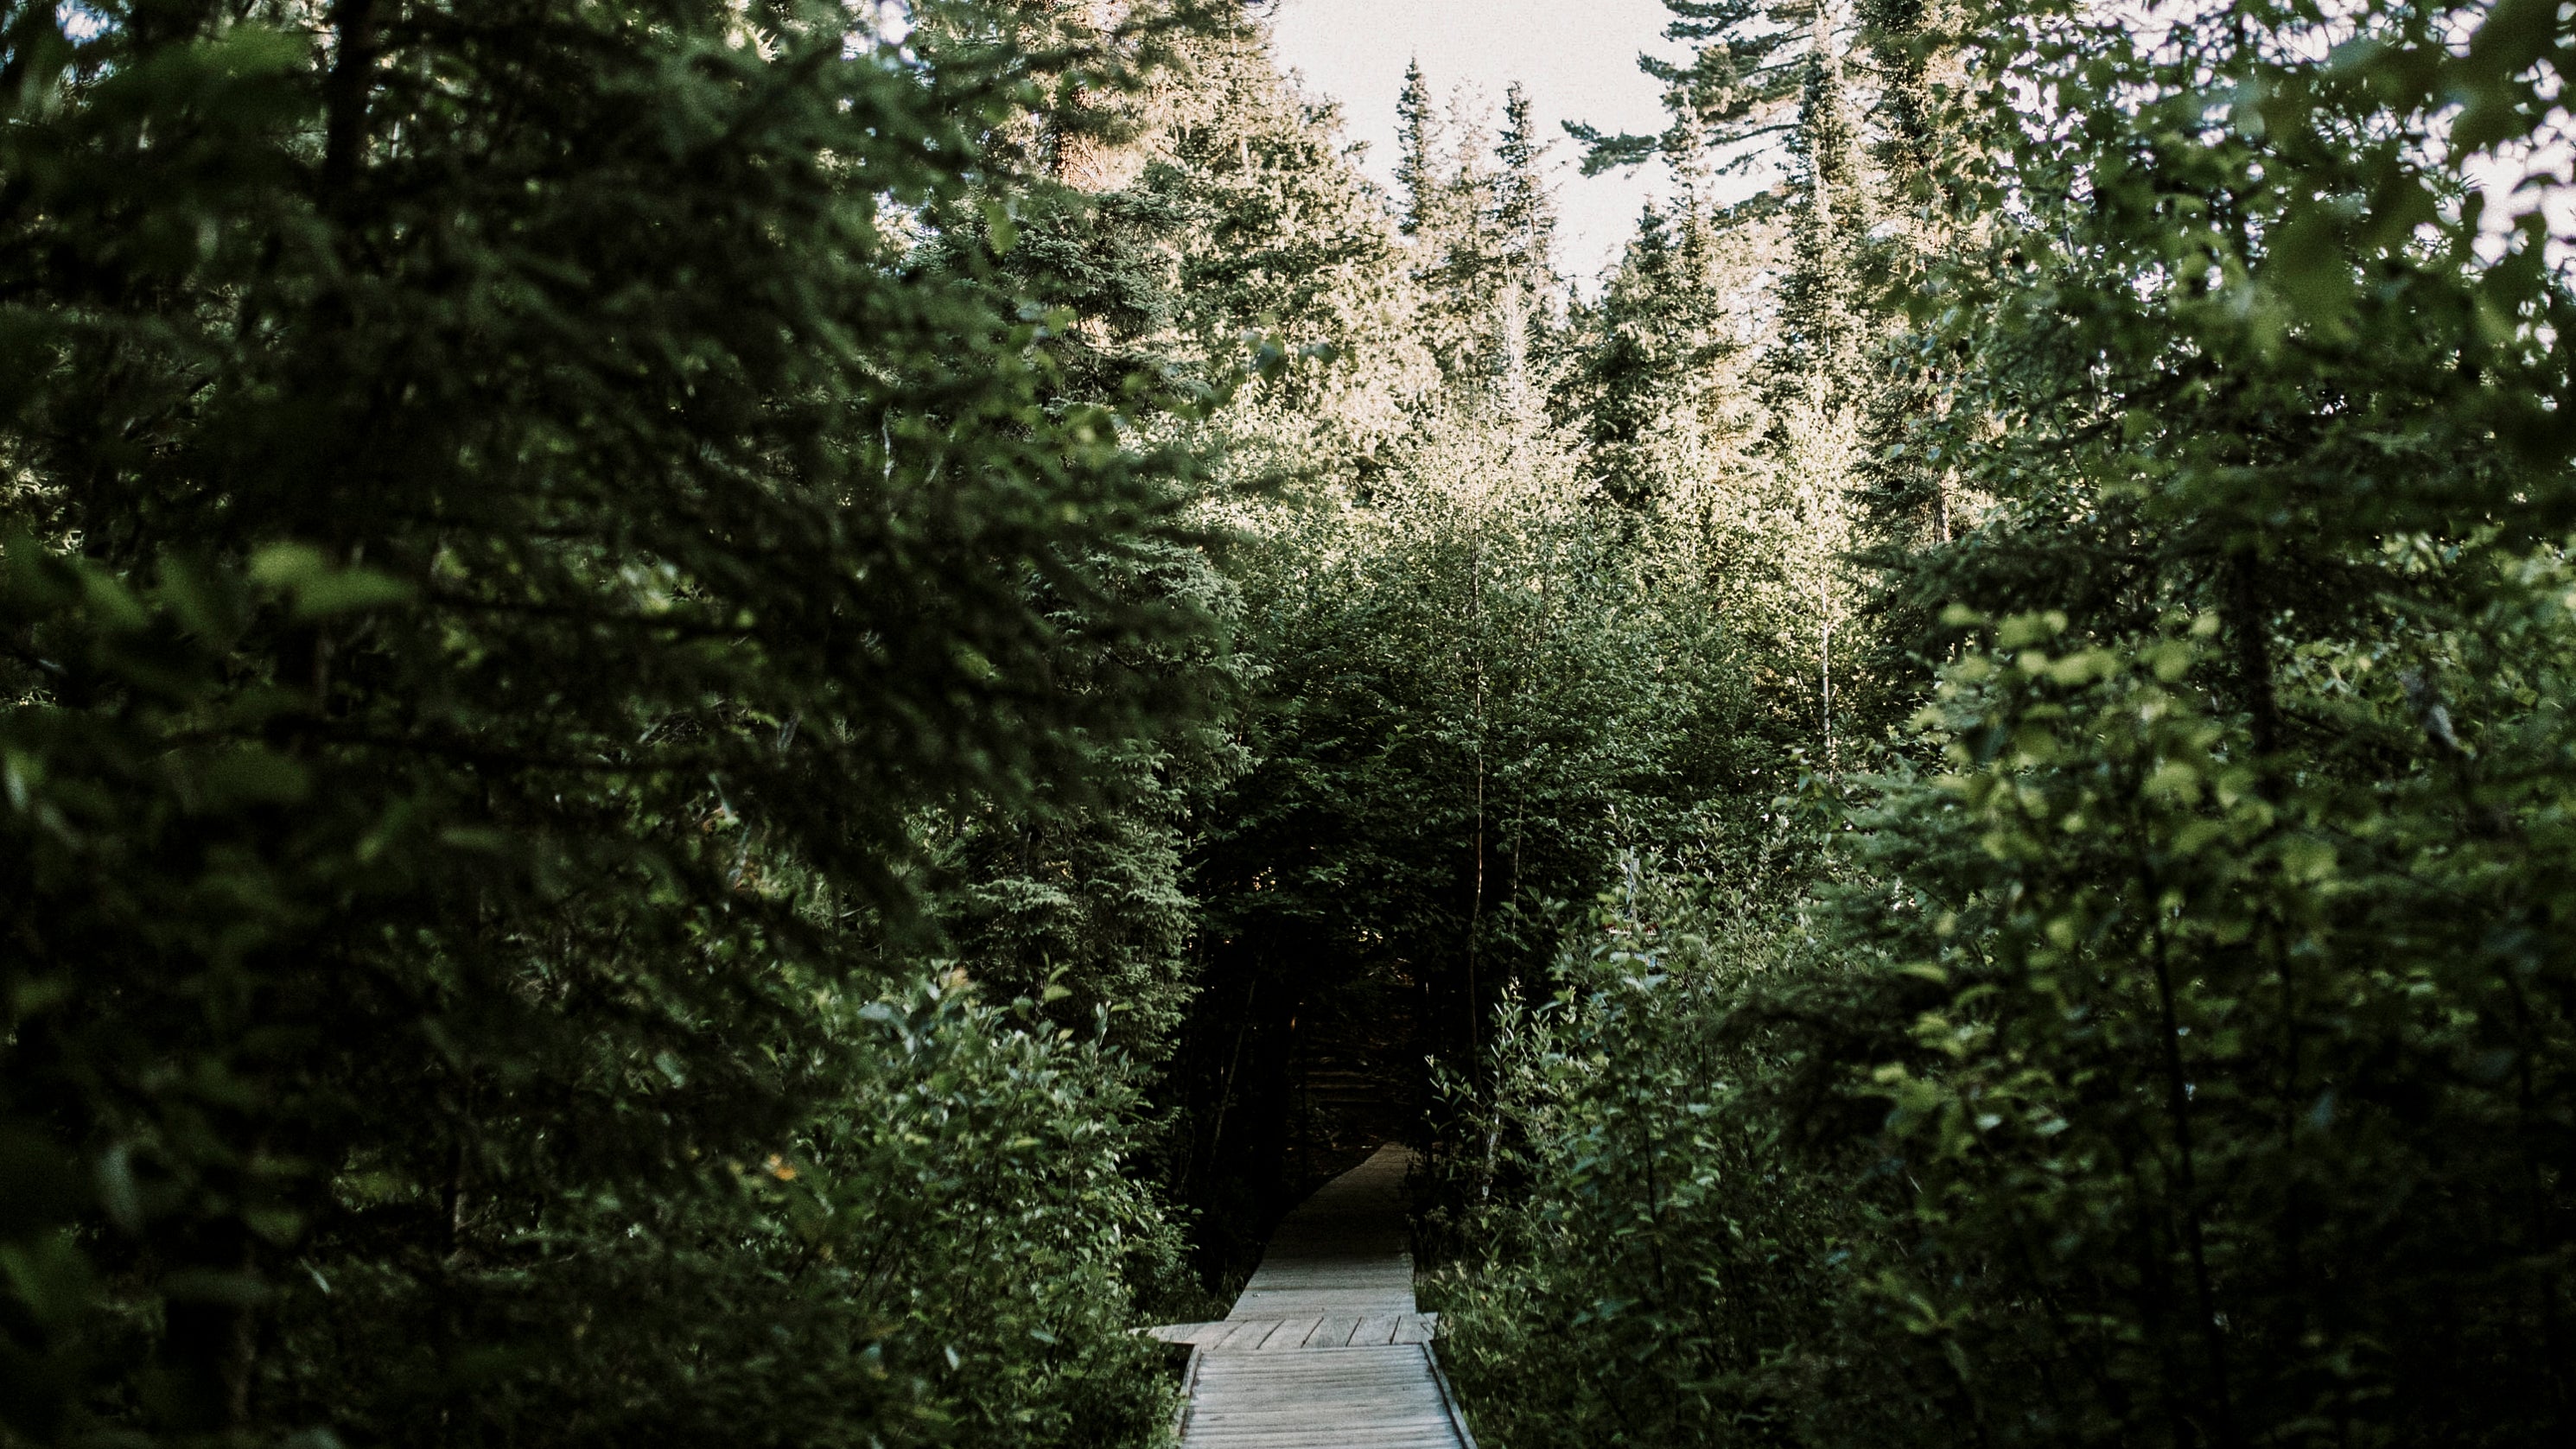 Wooden boardwalk path leading through a grove of trees and greenery